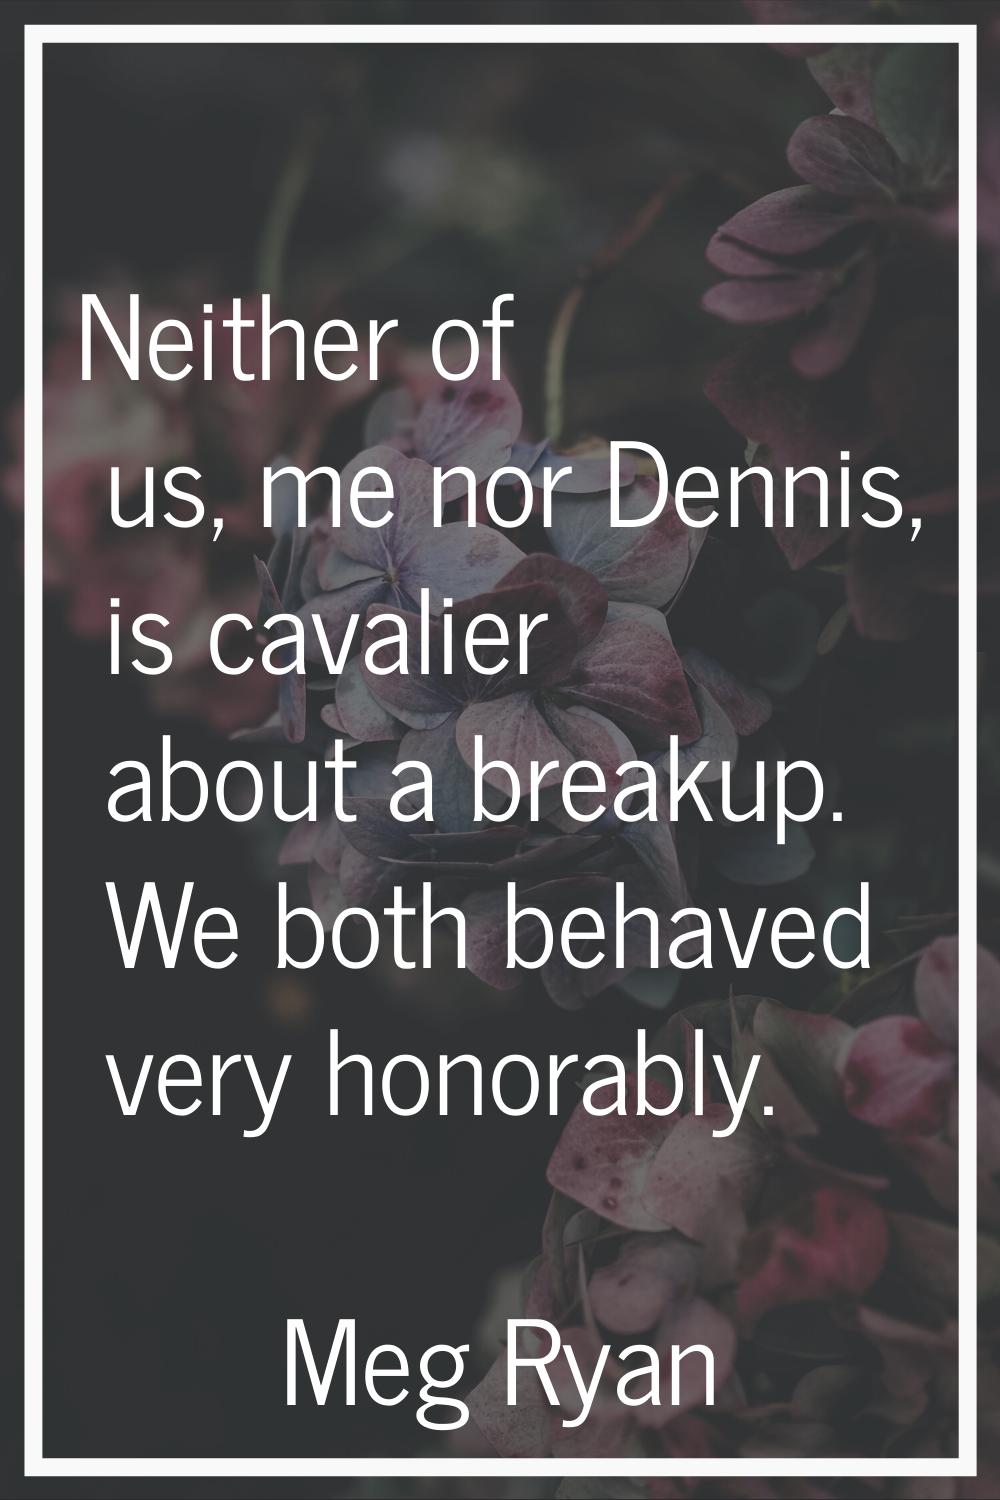 Neither of us, me nor Dennis, is cavalier about a breakup. We both behaved very honorably.